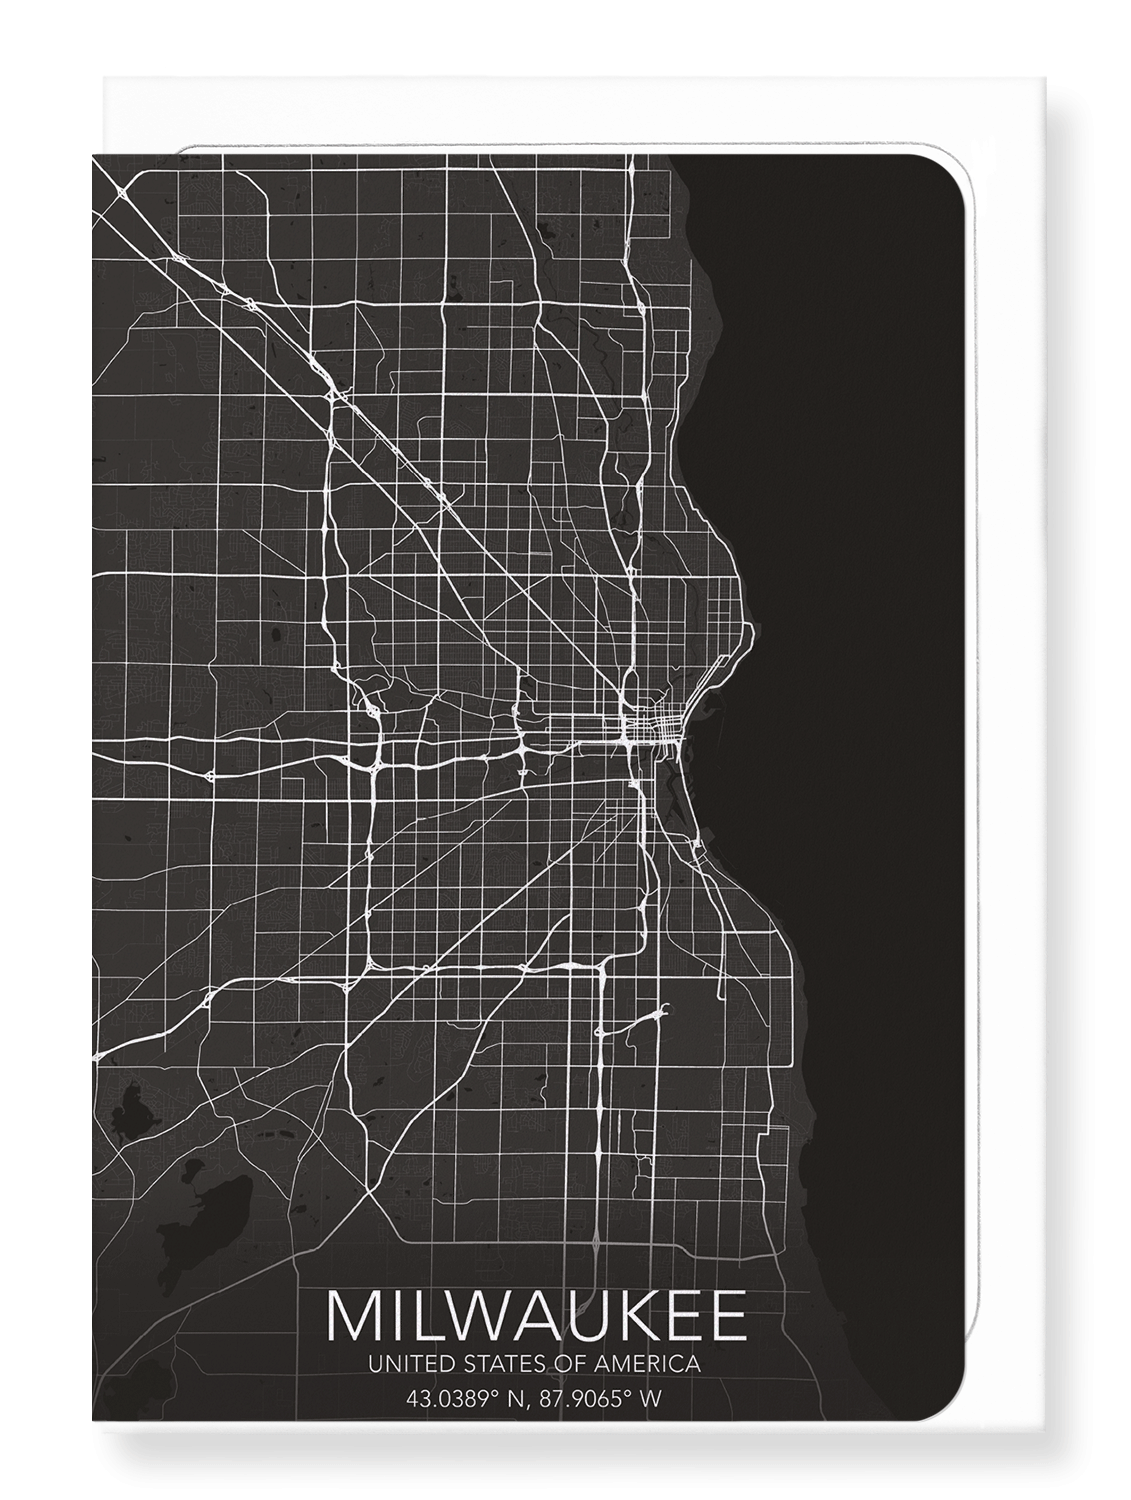 MILWAUKEE FULL MAP: 8xCards